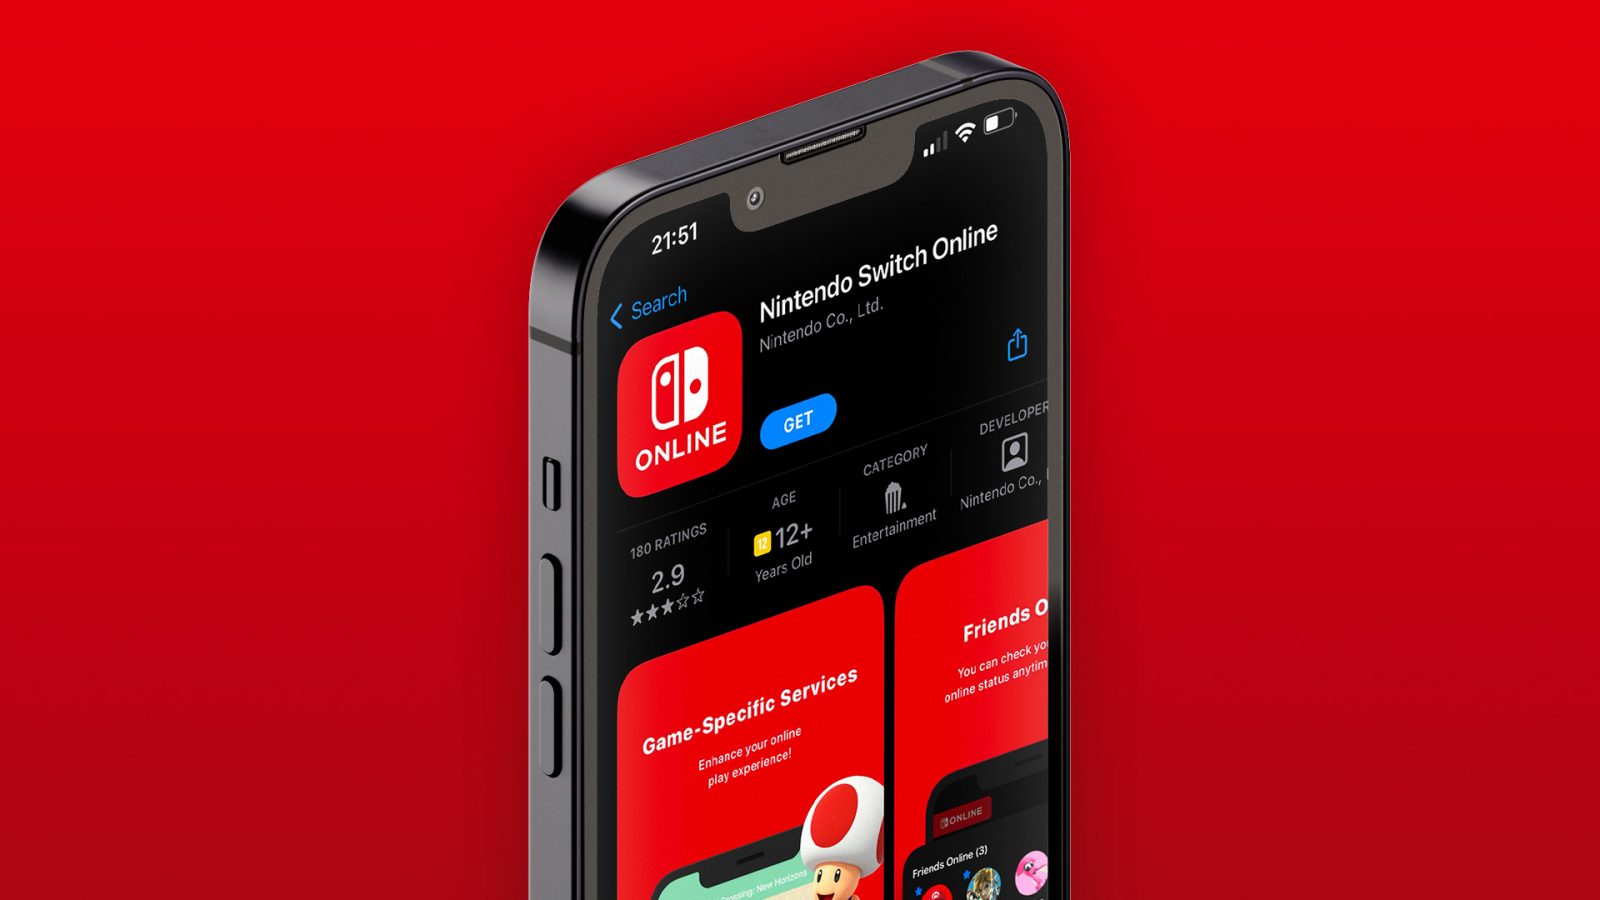 Nintendo Switch Online app now lets you send friend requests, now requires iOS 14